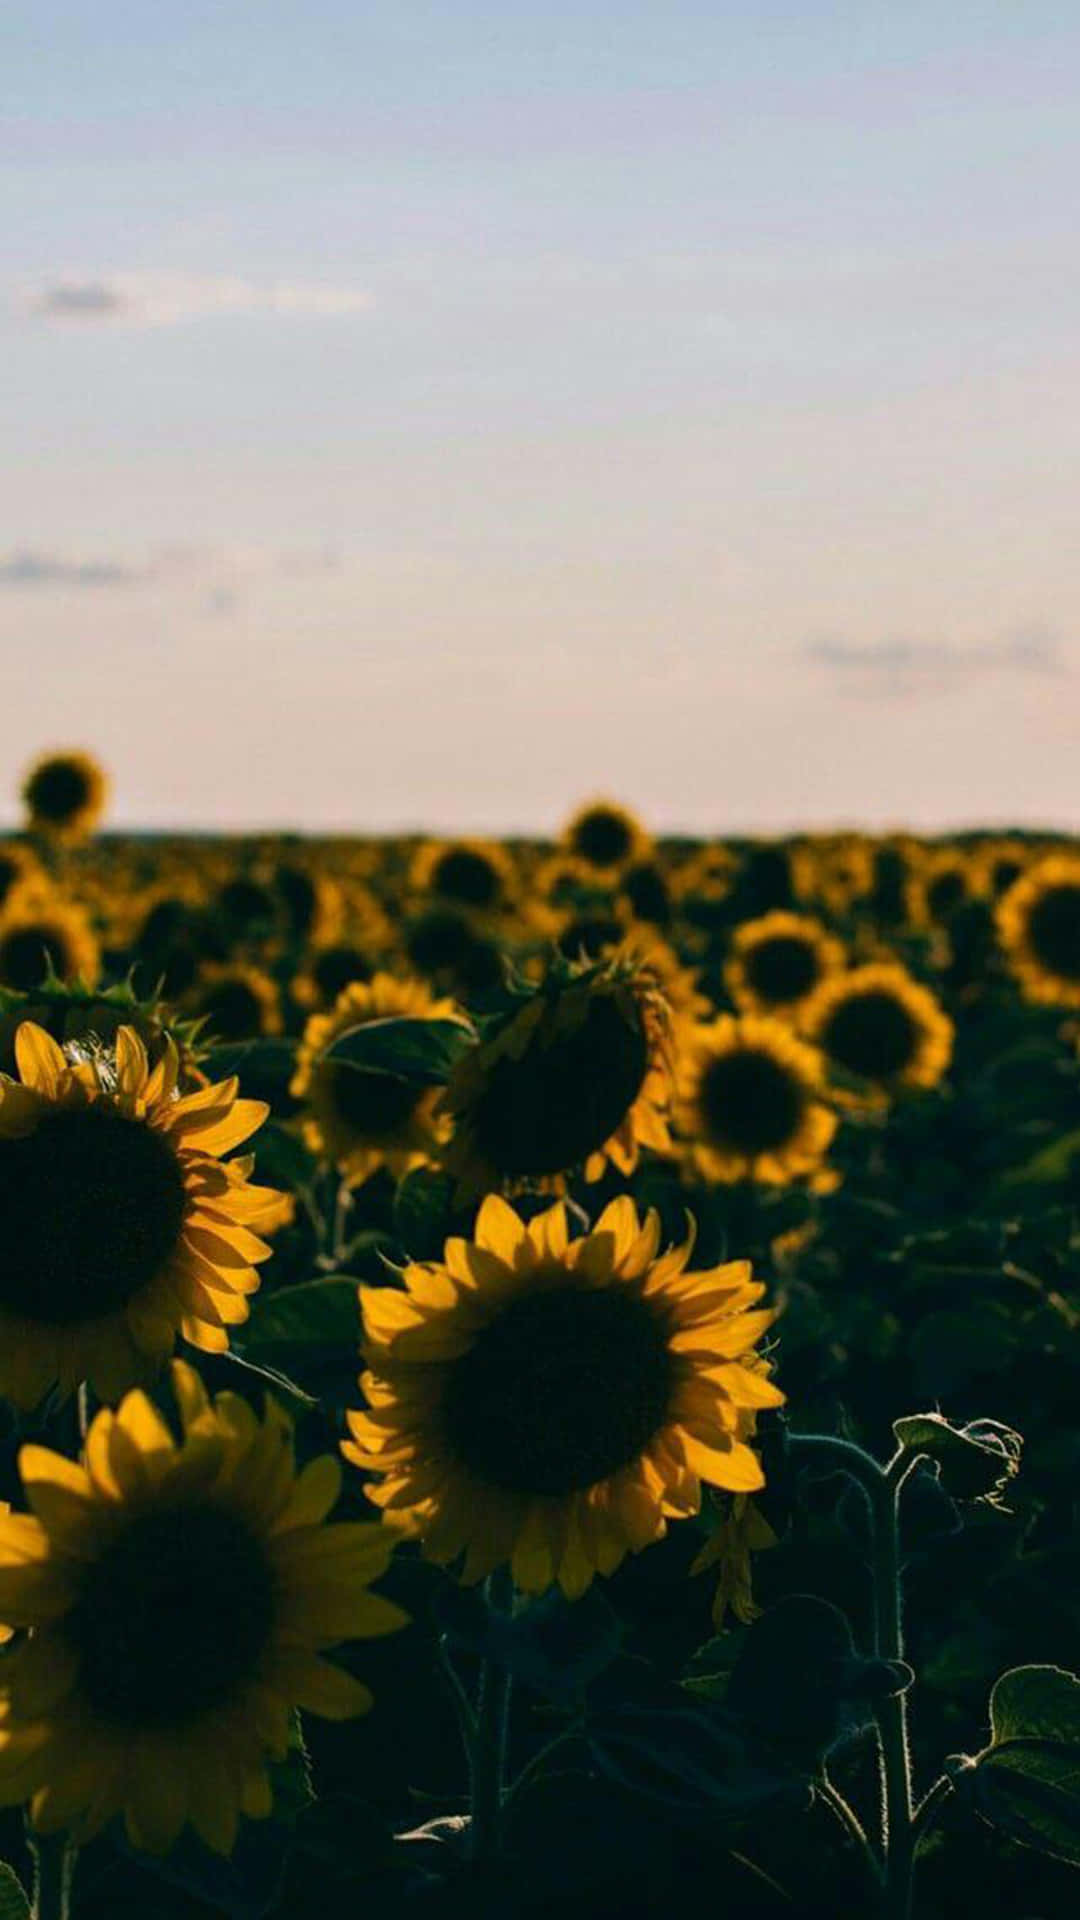 Sunflowers In A Field At Sunset Wallpaper